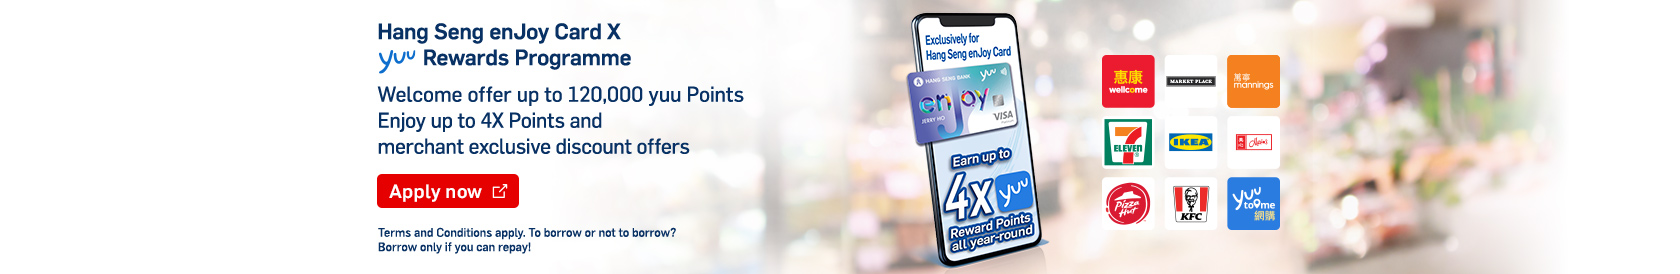 Refer now, Hang Seng enJoy Card Referral Program - Enjoy up to 400,000 yuu Points for successful referral, opens in new window